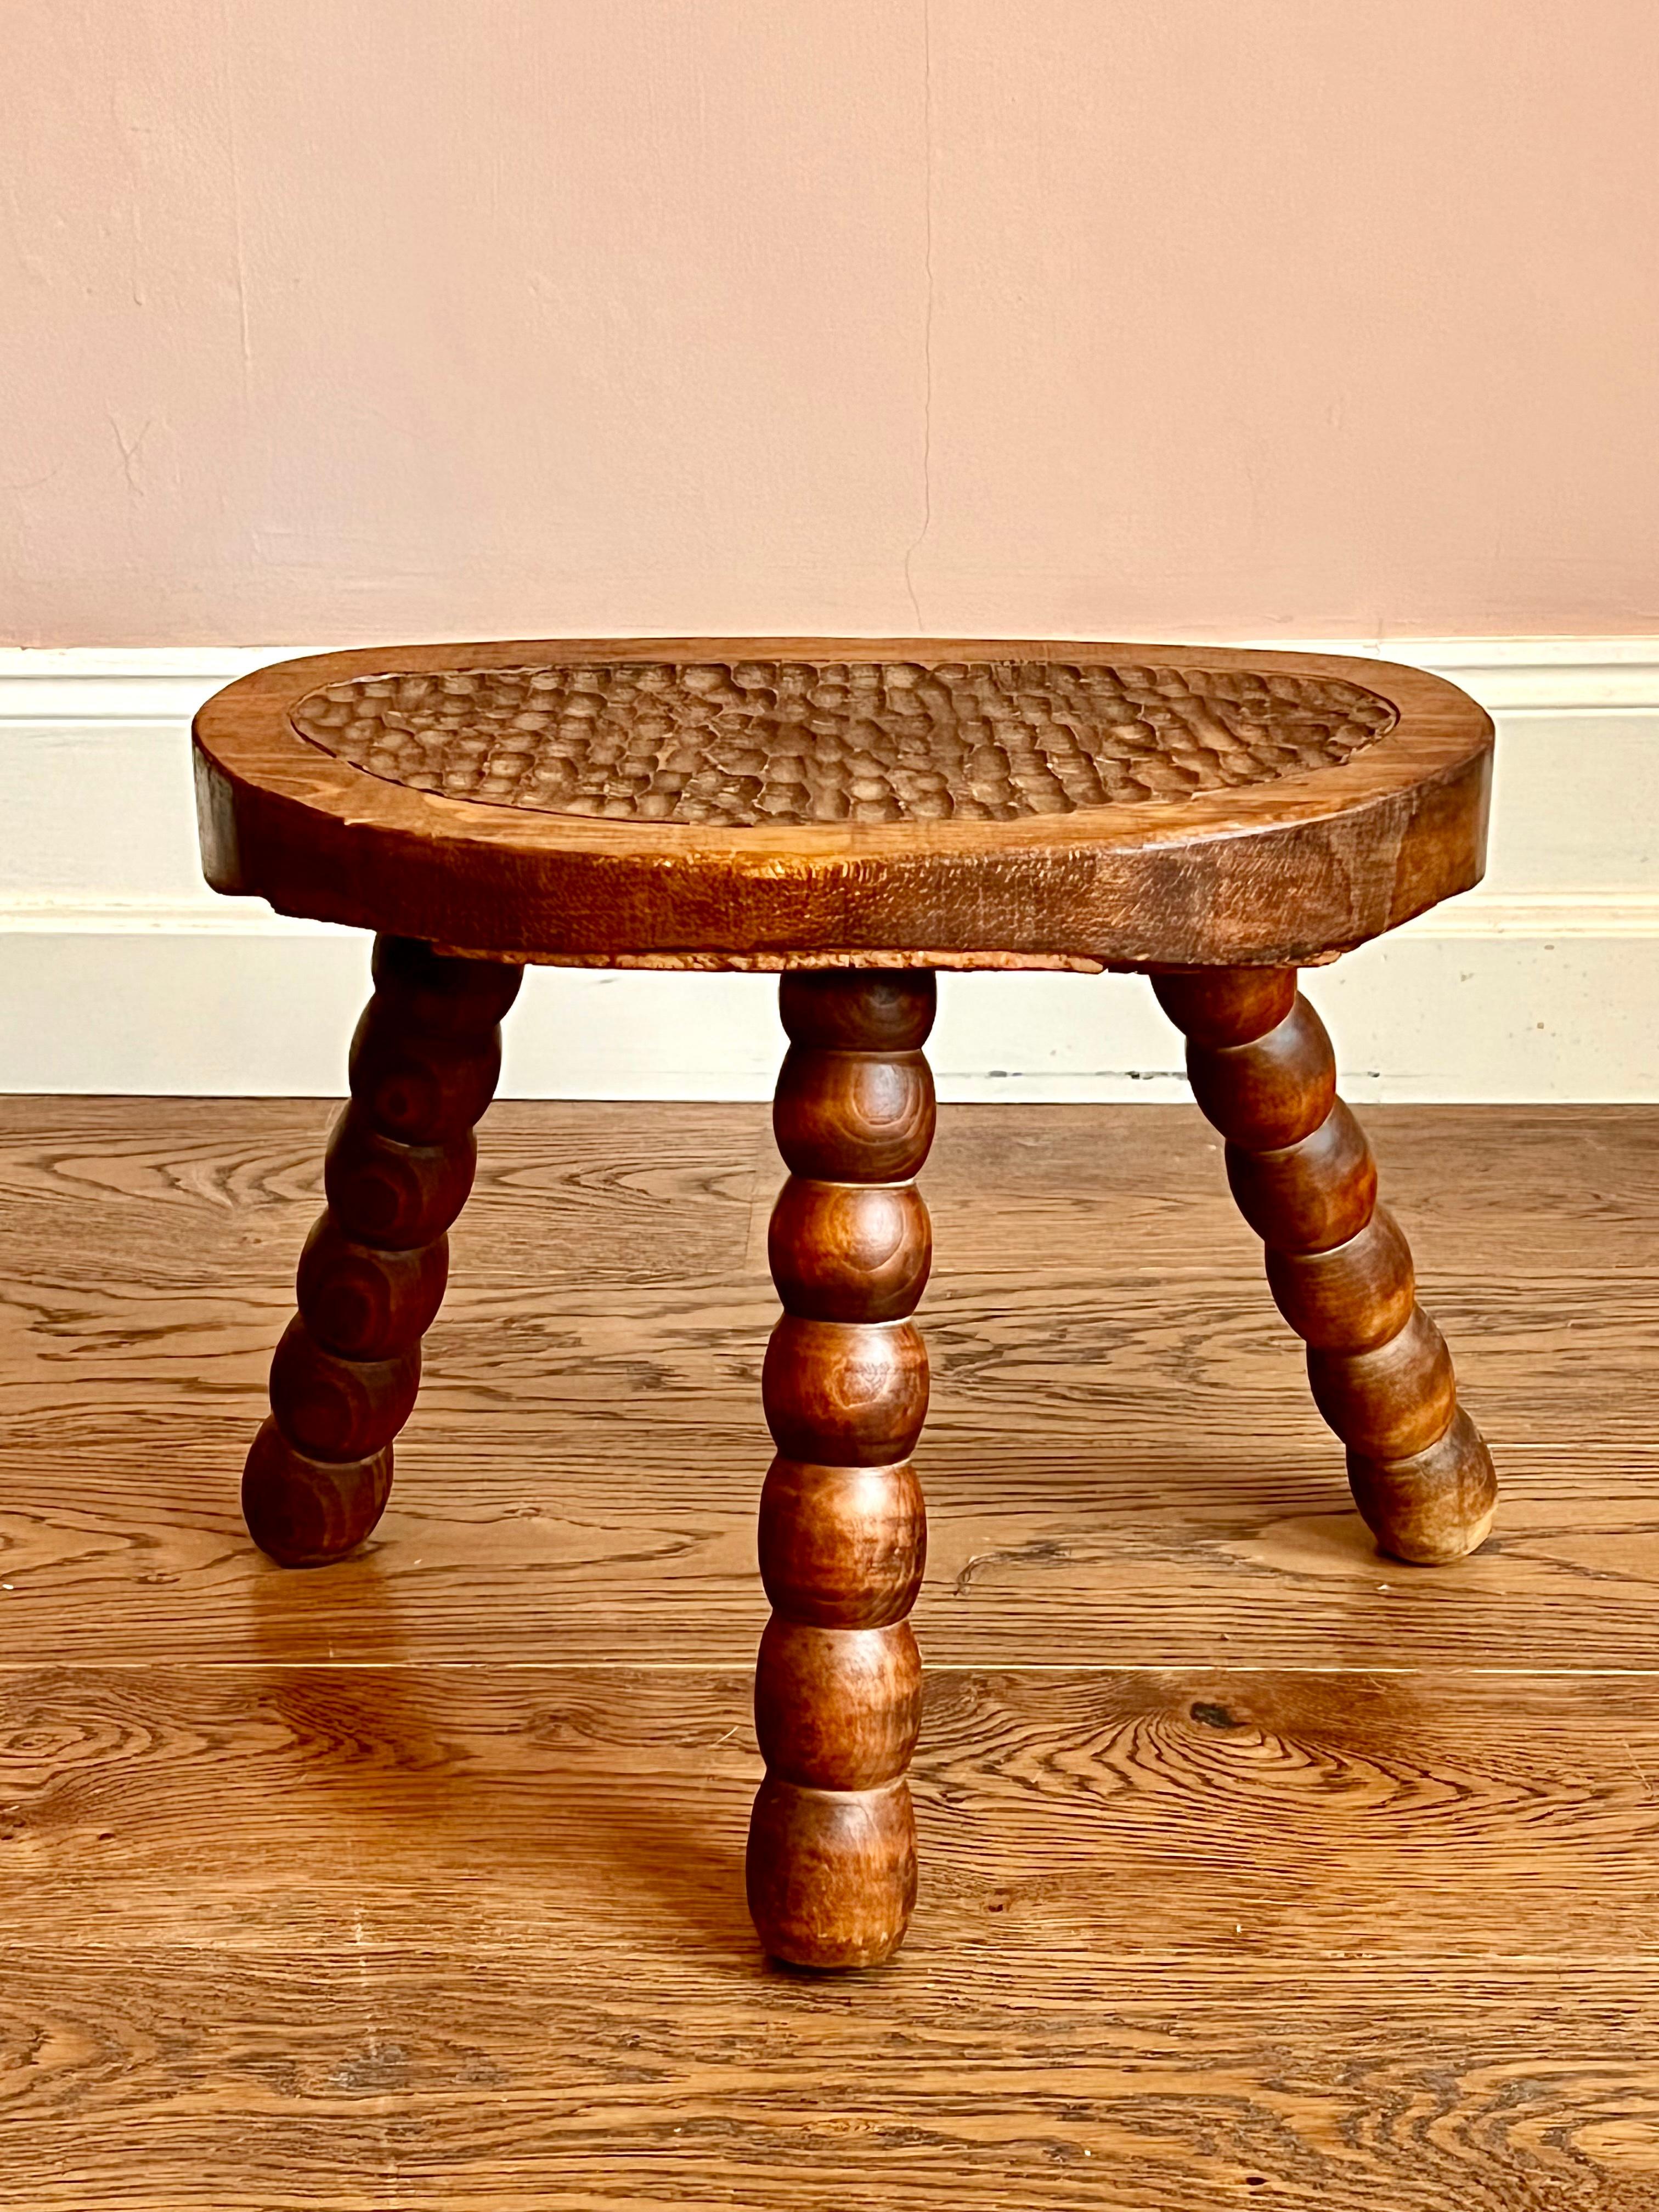 1960s French brutalist tripod stool.

Superb primitive oak stool with bobbin legs and carved seat retaining original bark base. In very good solid condition with light and attractive wear.

Height 36cm Width (at feet) 46cm Seat Width 40.5cm Depth